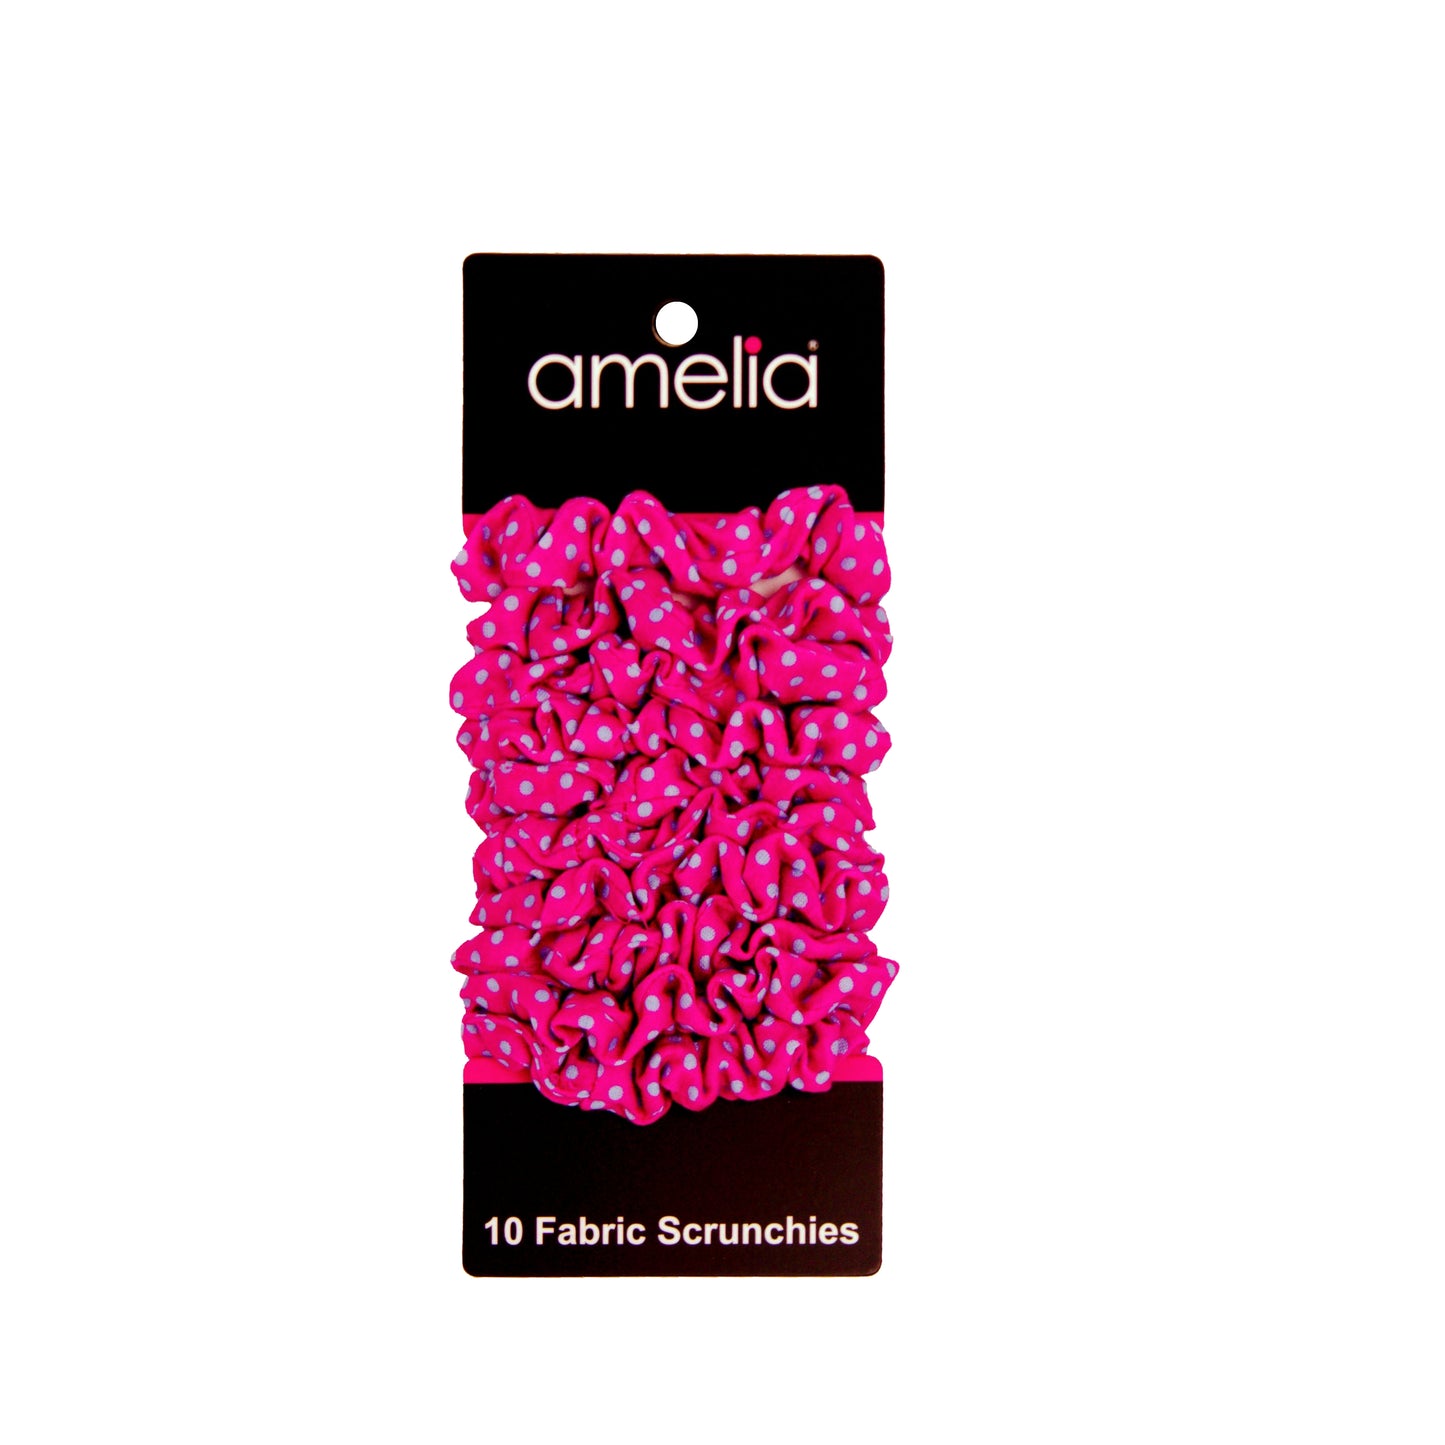 Amelia Beauty, Medium Pink with Blue Polka Dot Jersey Scrunchies, 2.5in Diameter, Gentle on Hair, Strong Hold, No Snag, No Dents or Creases. 10 Pack